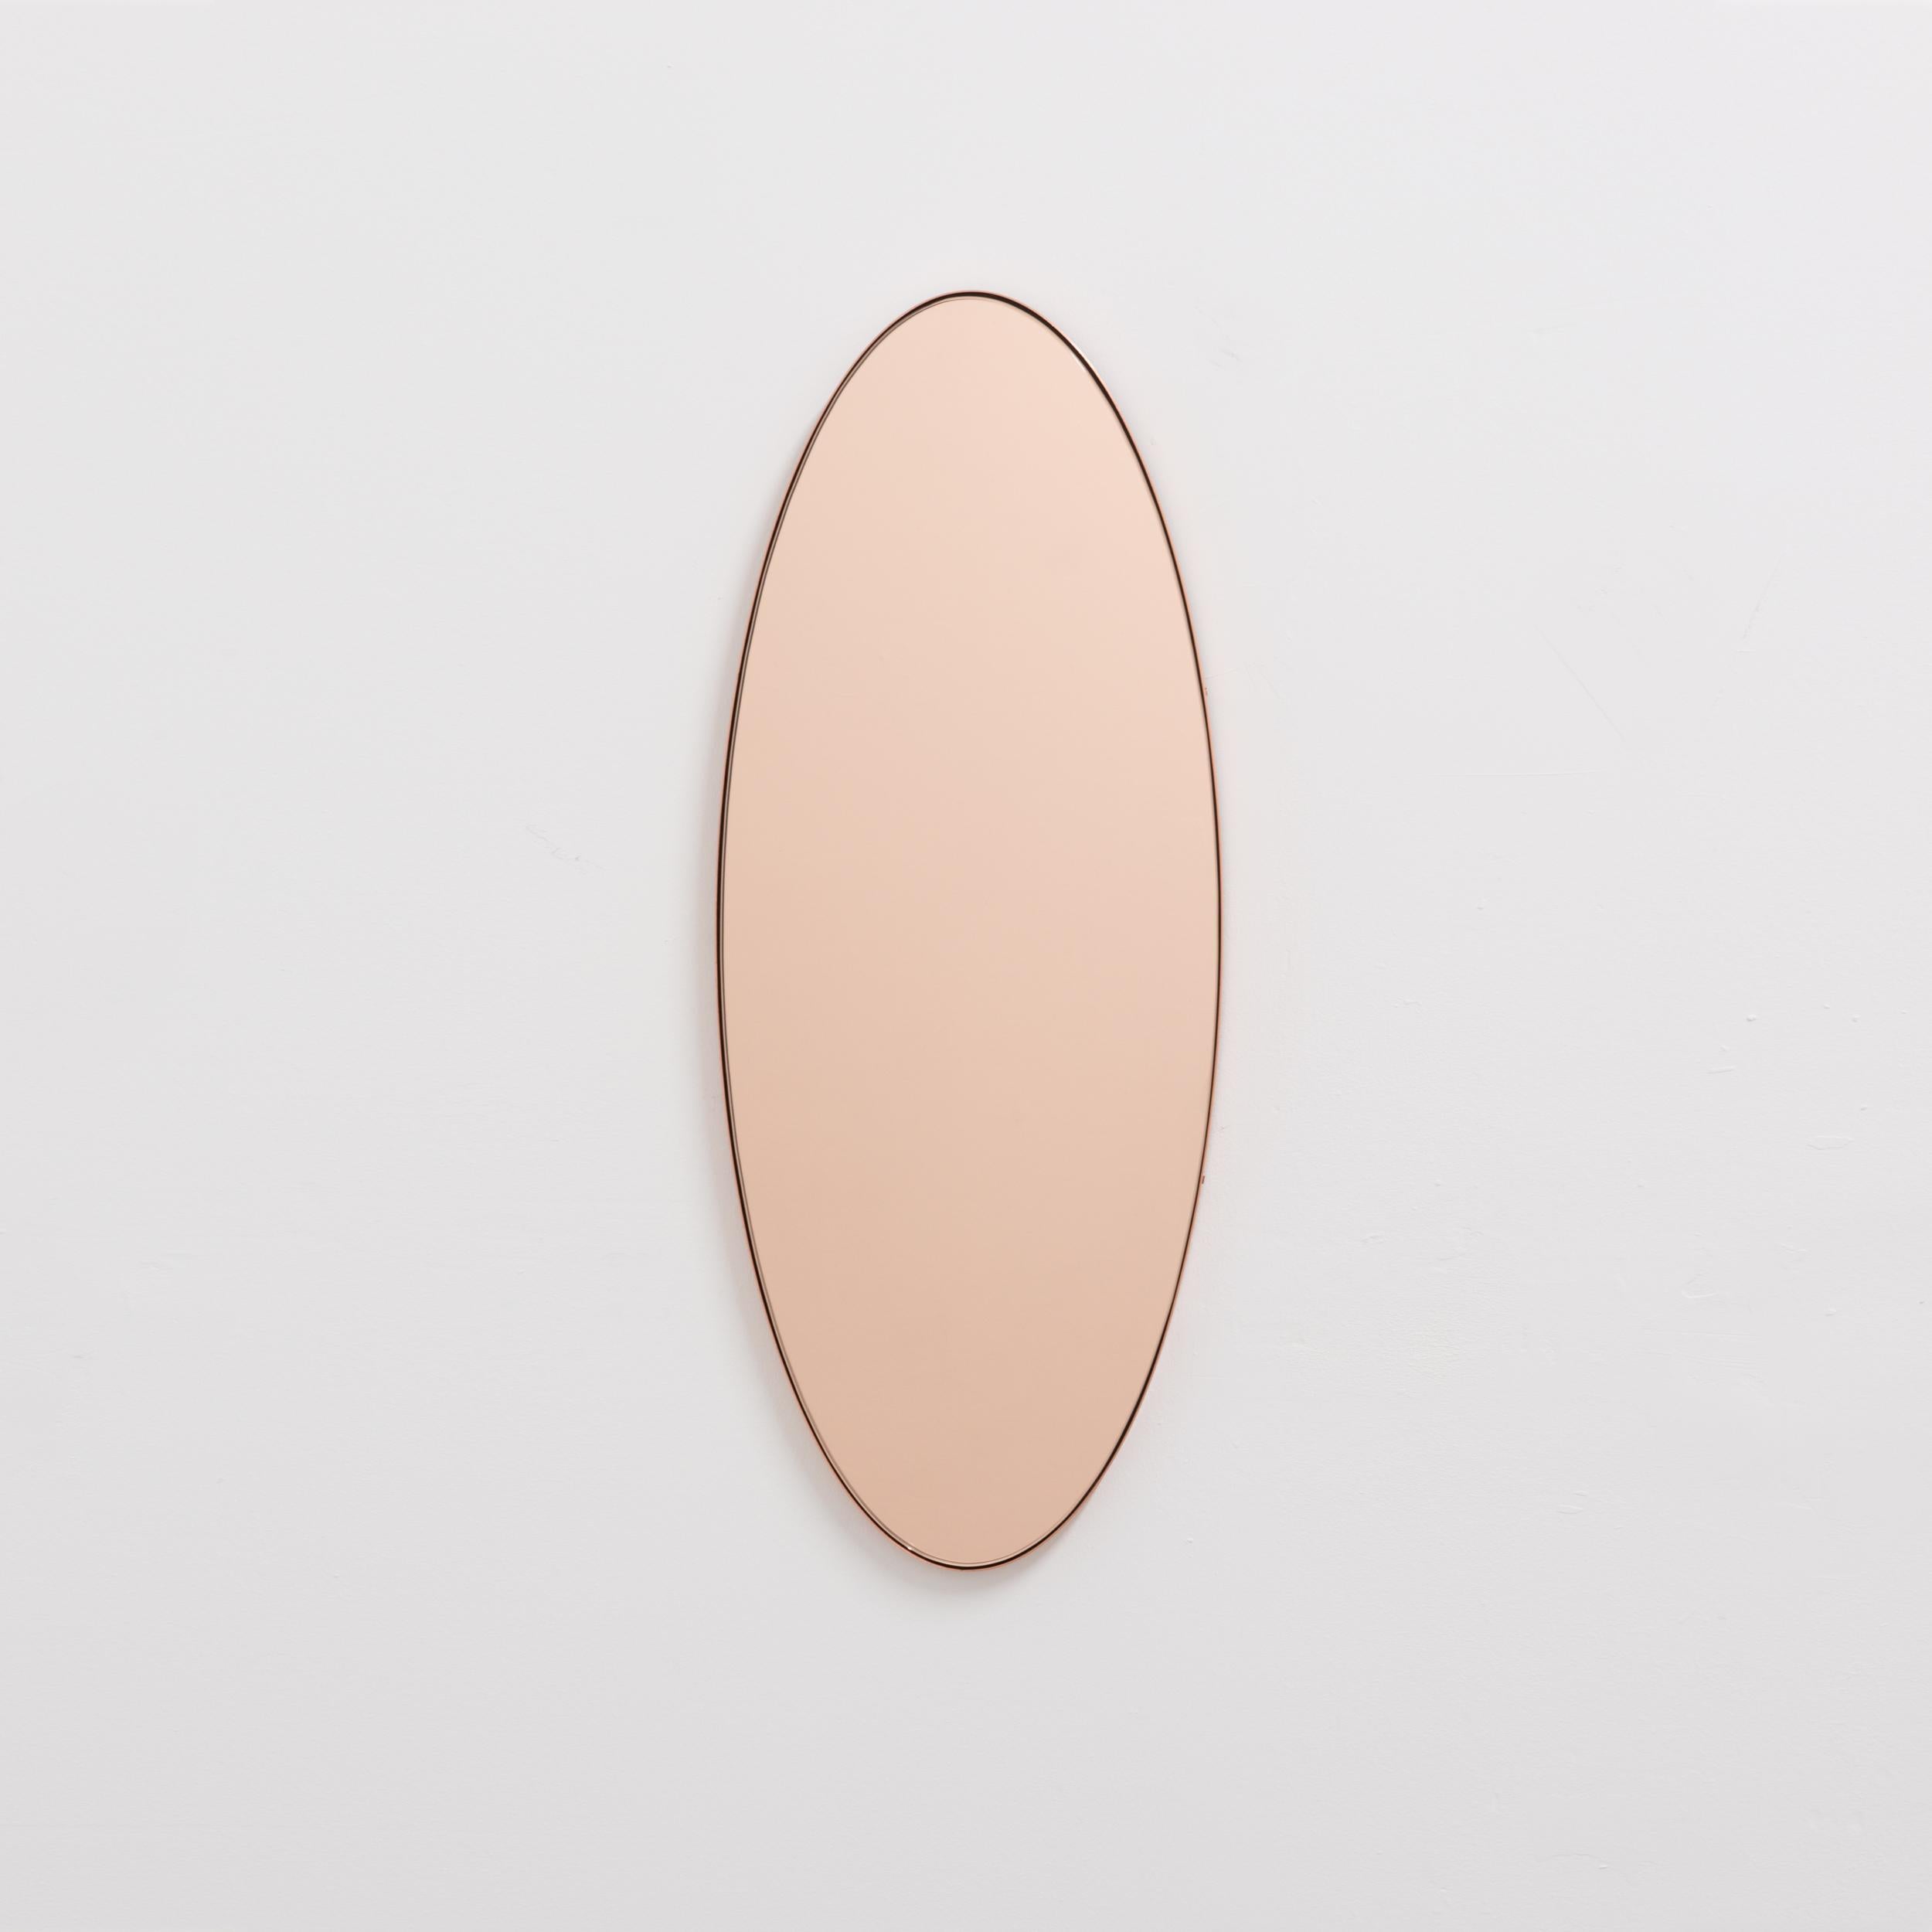 Ovalis Oval shaped Rose Gold Contemporary Mirror with a Copper Frame, Small In New Condition For Sale In London, GB